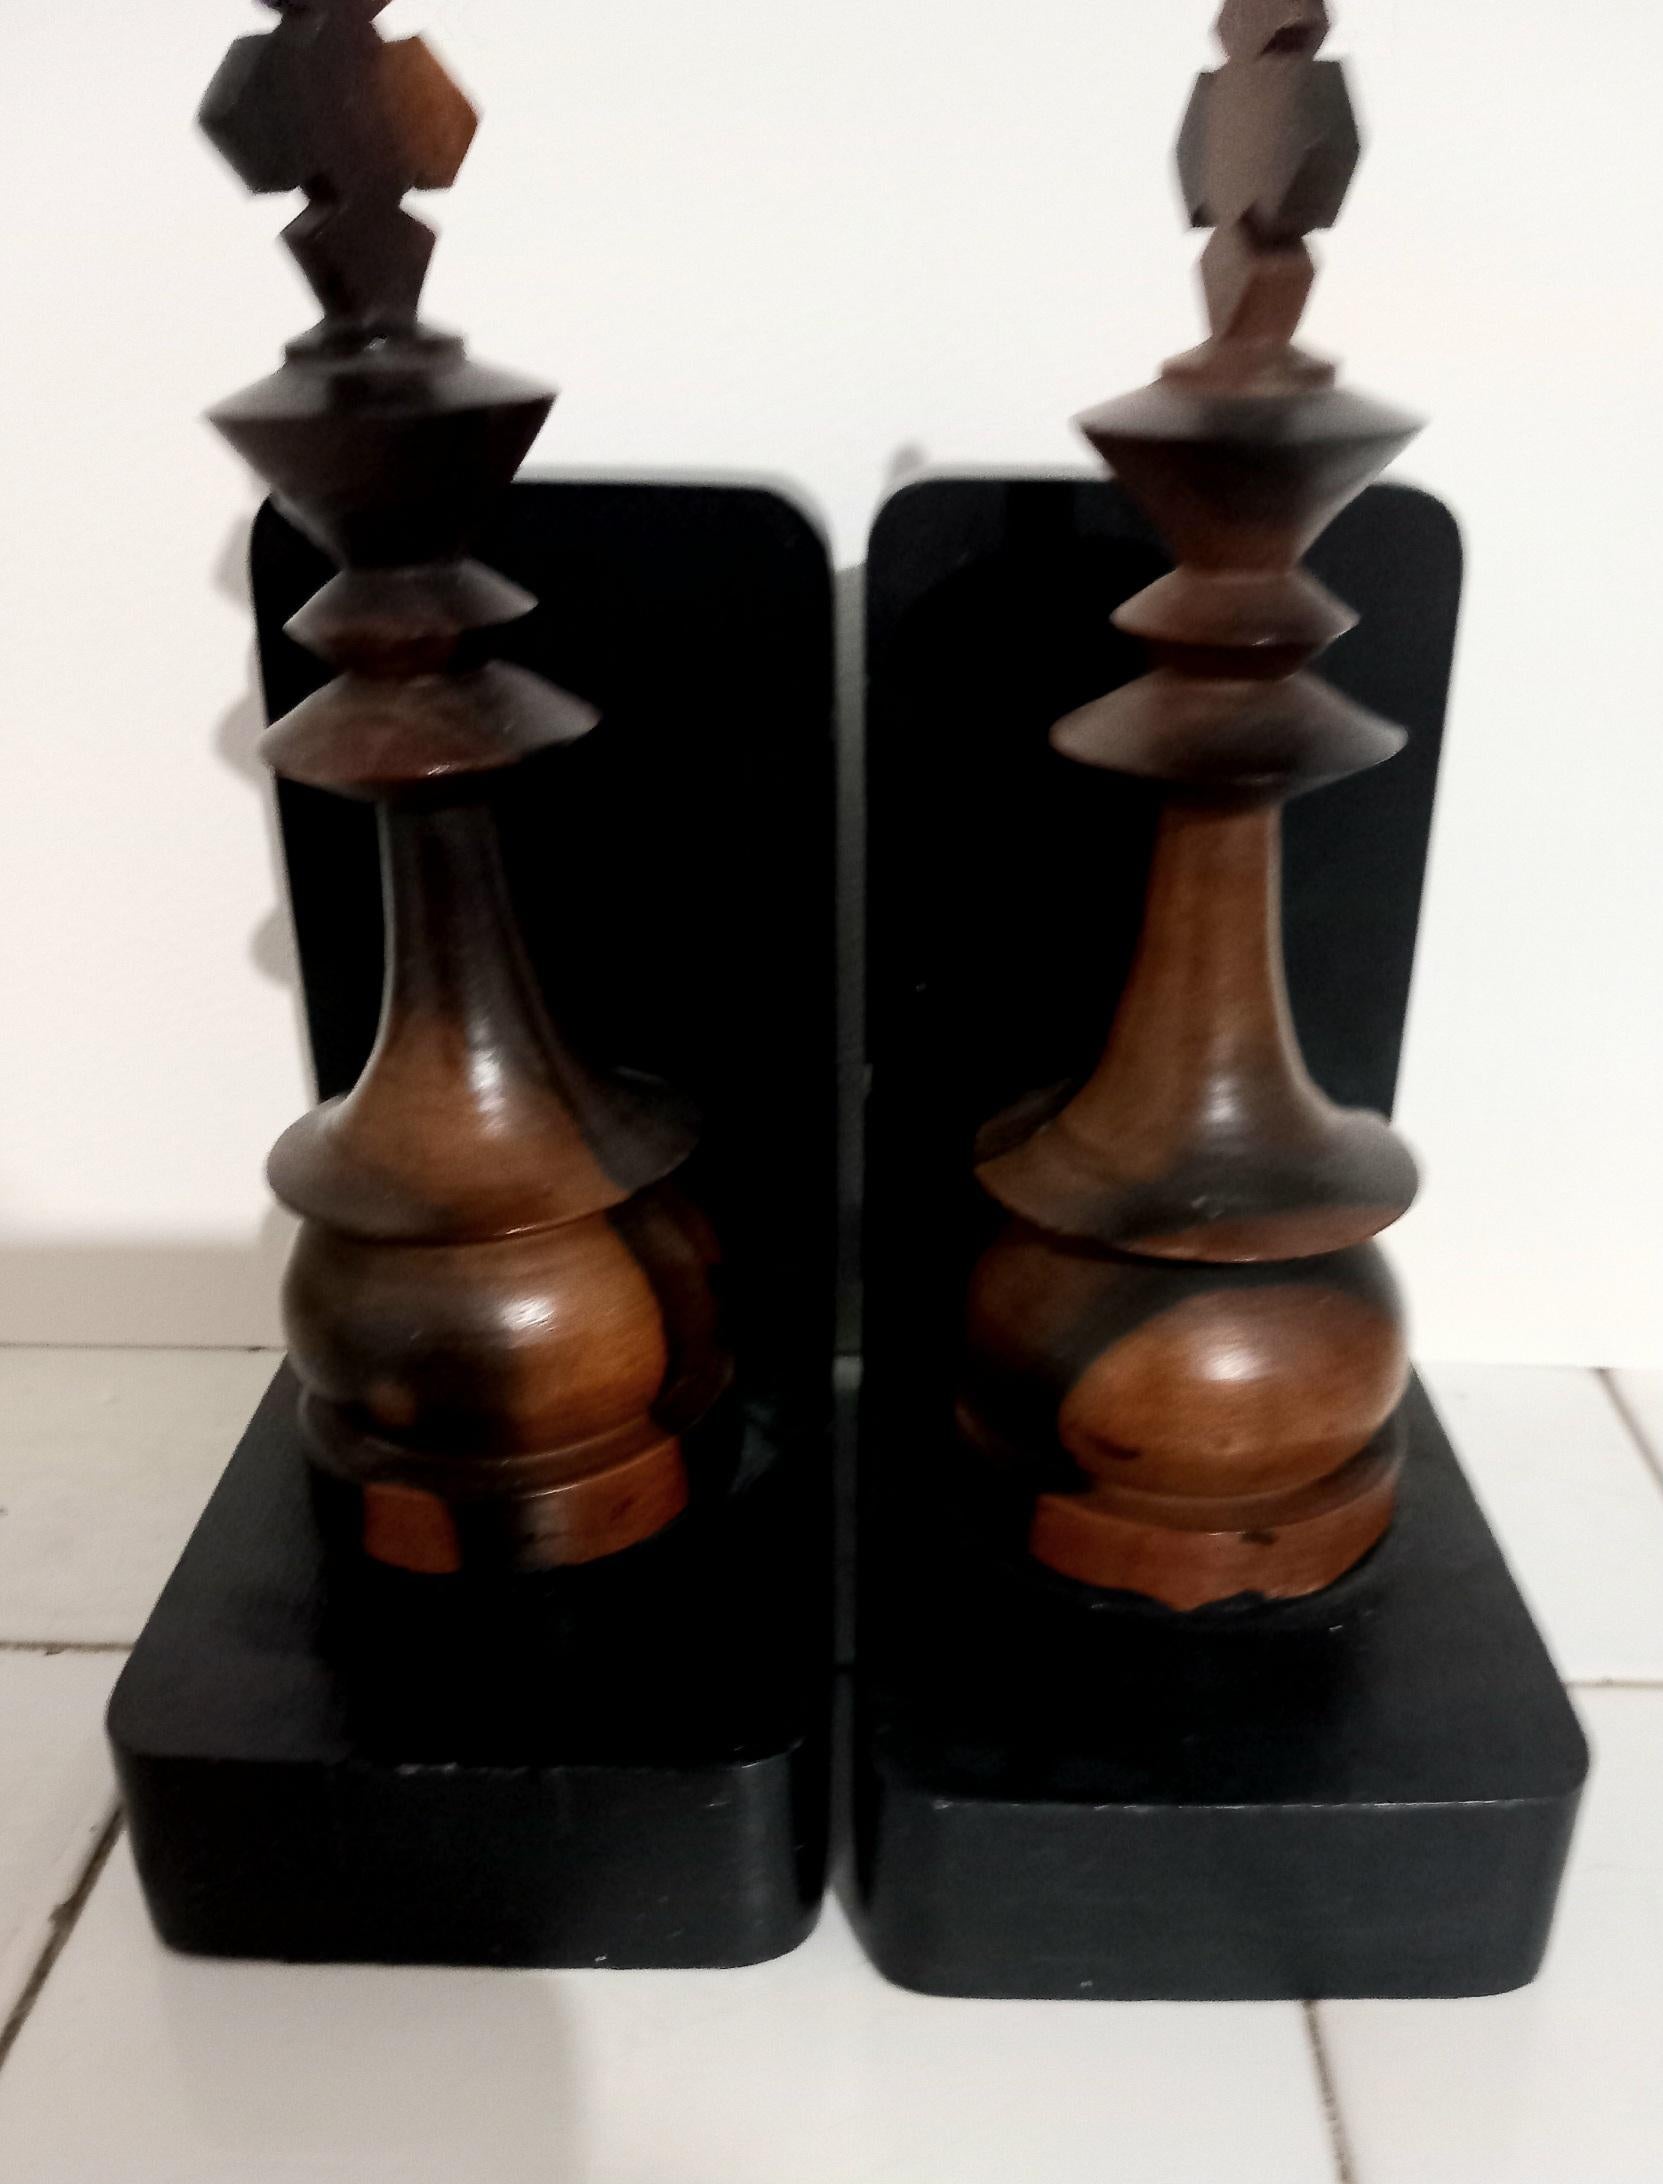 Spanish Bookends Chess Figures Carved in the Shape of The King, With Noble Wood Antique For Sale